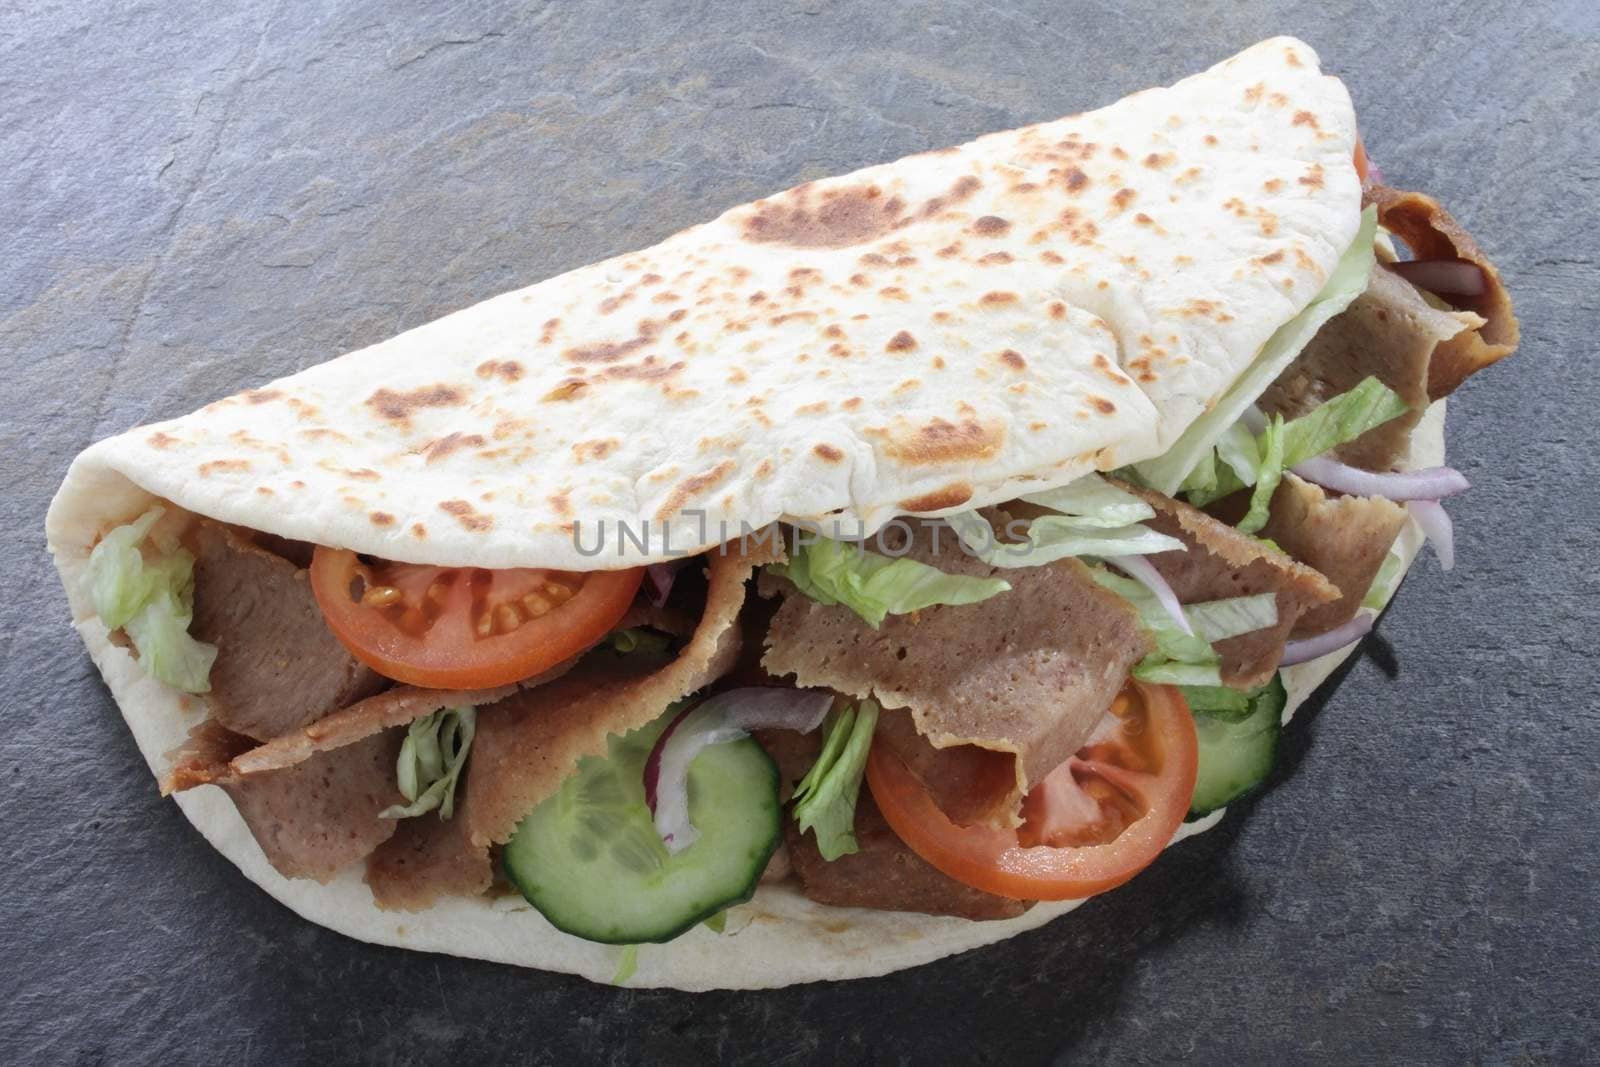 indian donner wrap by neil_langan